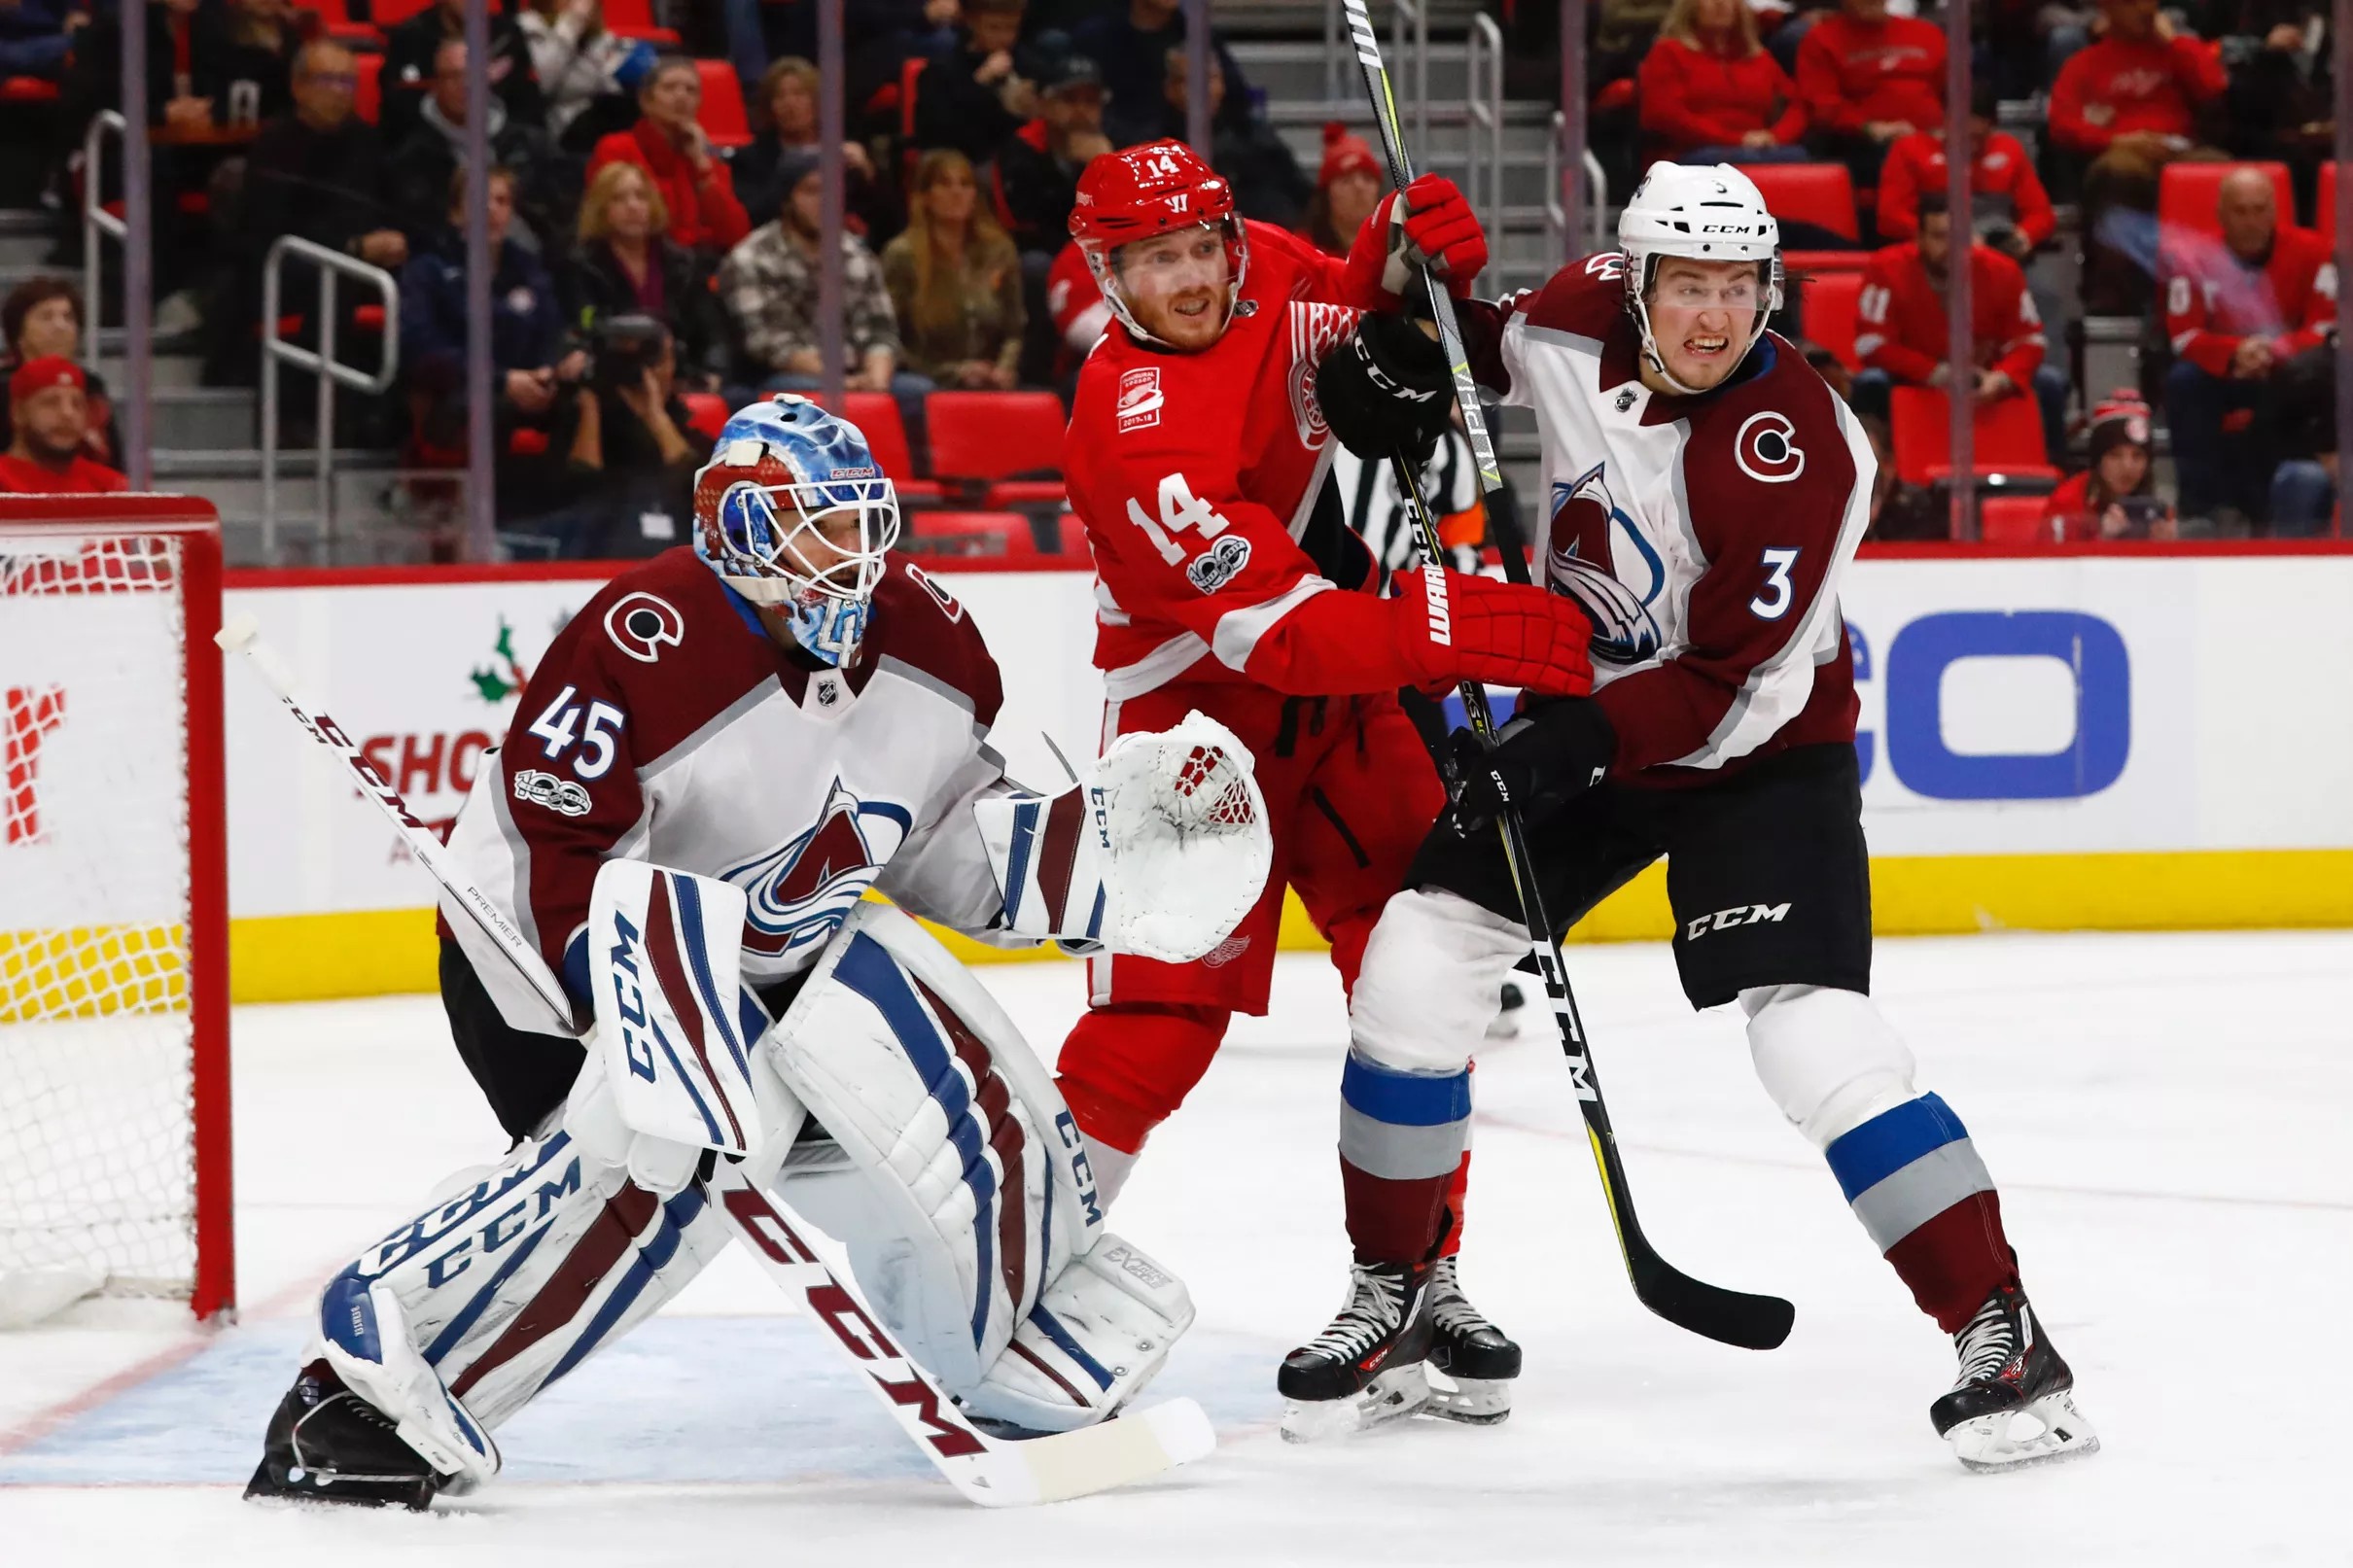 Red Wings vs Avalanche: Rank ‘Em!